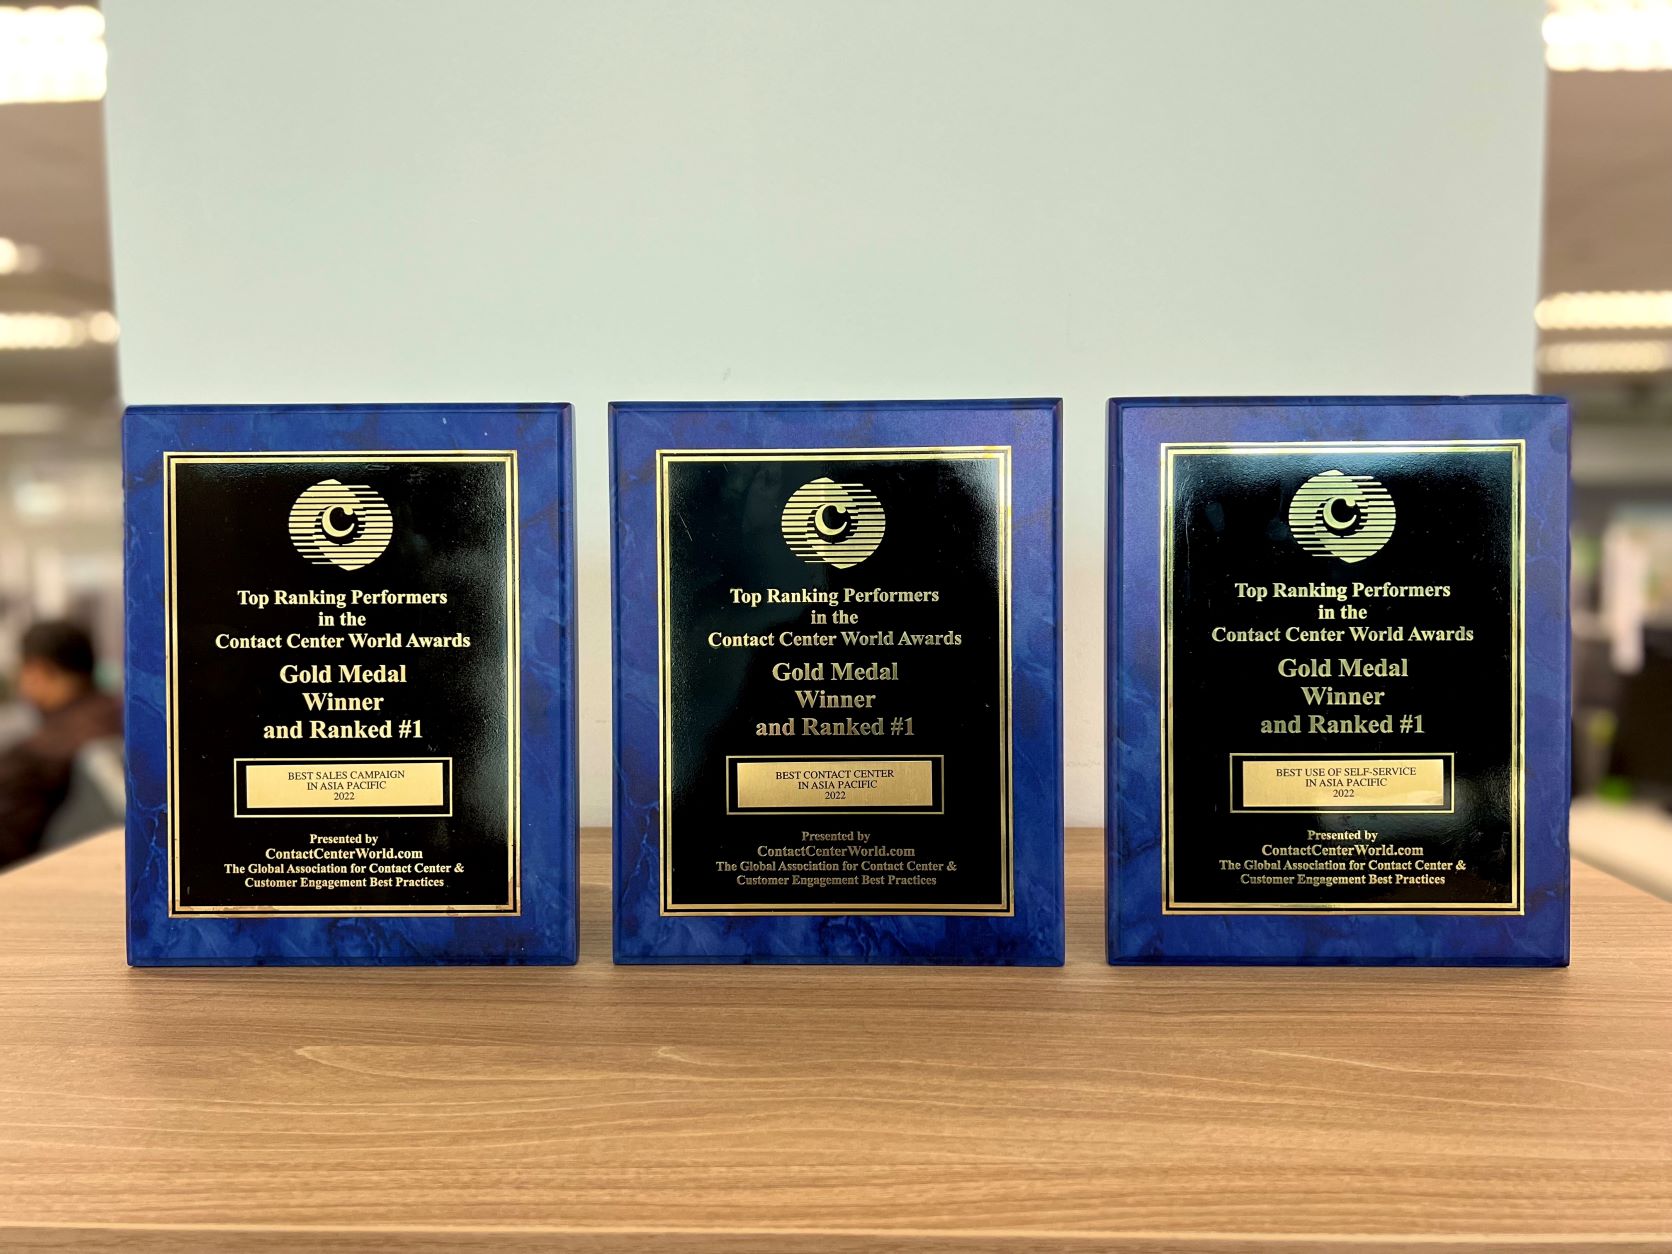 Maxis’ continuous efforts in customer service wins them top regional awards 